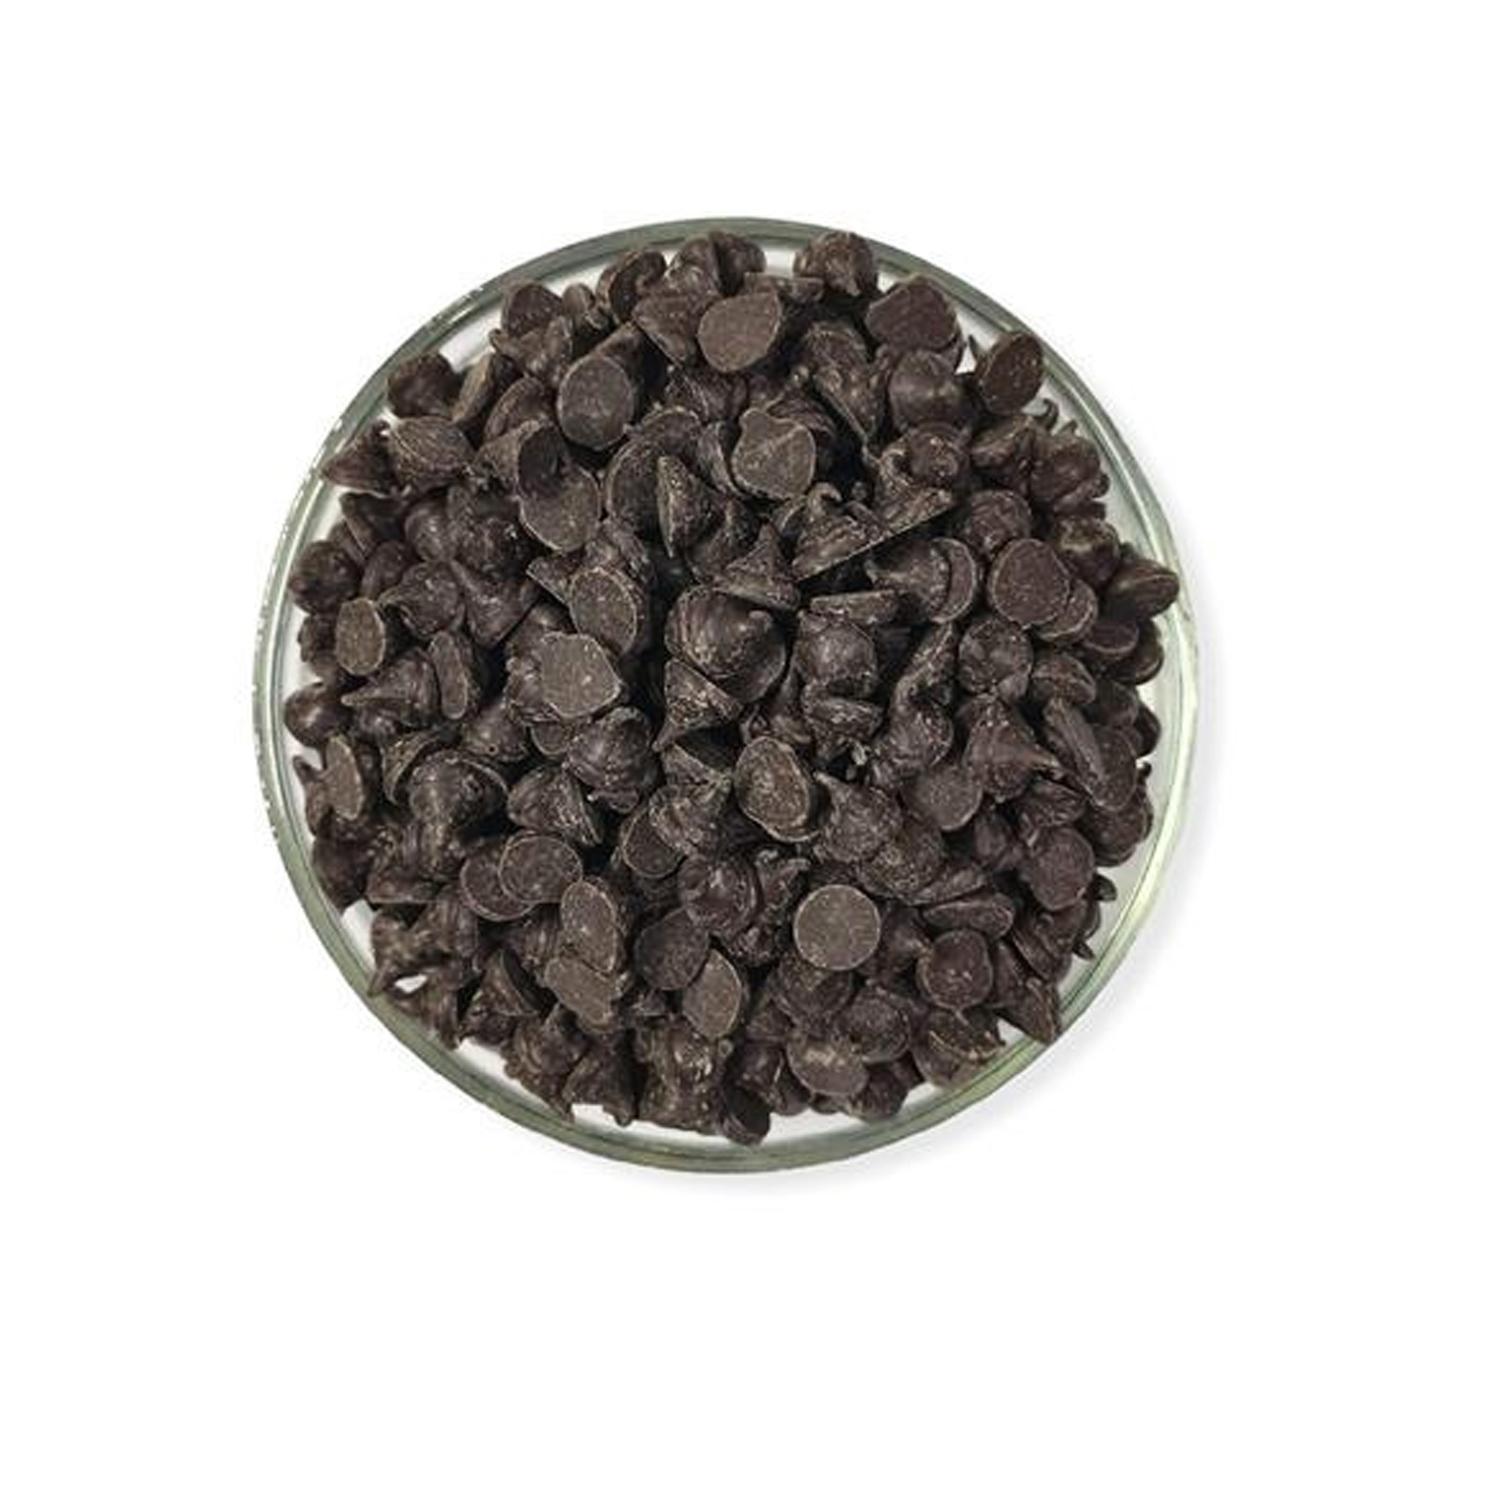 2M COCOA DARK CHOCOLATE CHIPS 10KG (Wholesale)